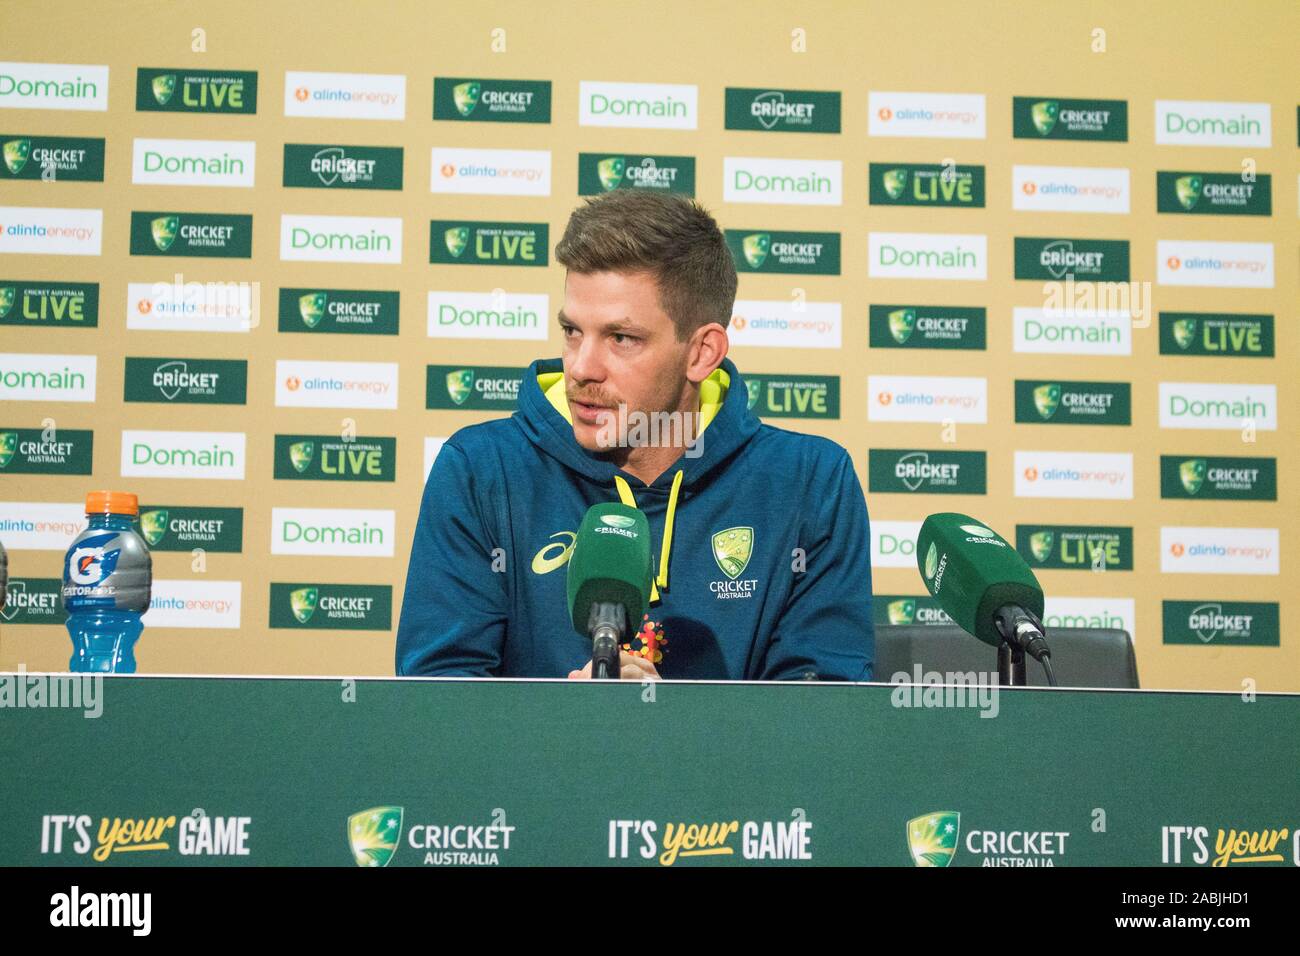 Adelaide, Australia 28 November 2019. Australia Cricket test captain Tim Paine gives a media interview ahead of the 2nd Domain Day Night test using a pink ball which begins on Friday between Australia and Pakistan at the Adelaide Oval. Australia leads 1-0 in the 2 match series .Credit: amer ghazzal/Alamy Live News Stock Photo